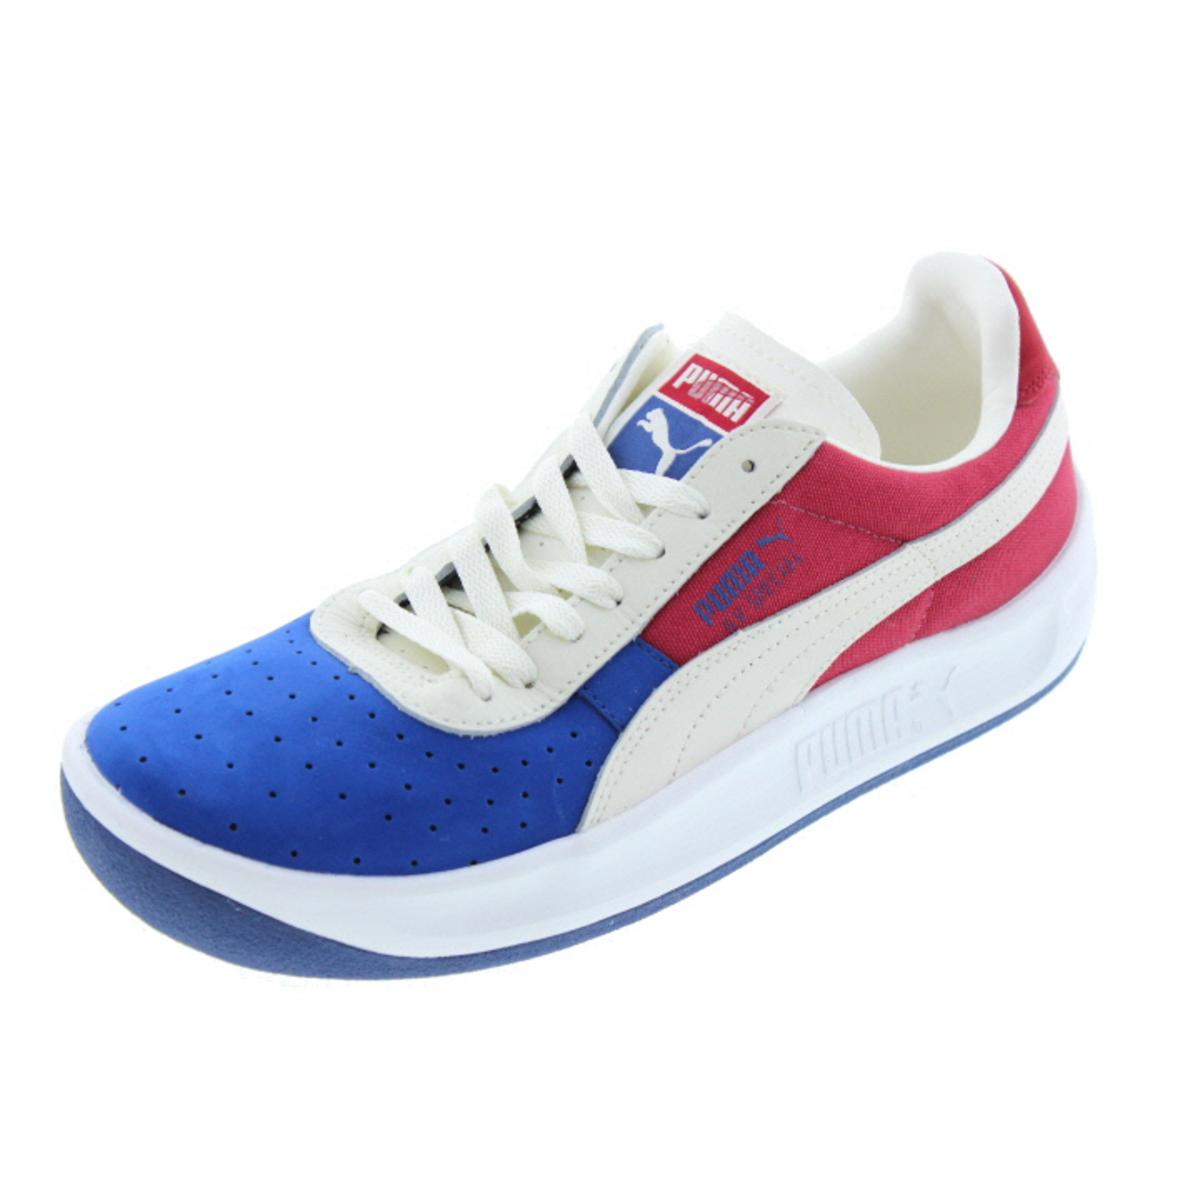 Puma 6147 Mens GV Special Leather Classic Athletic Tennis Shoes ...